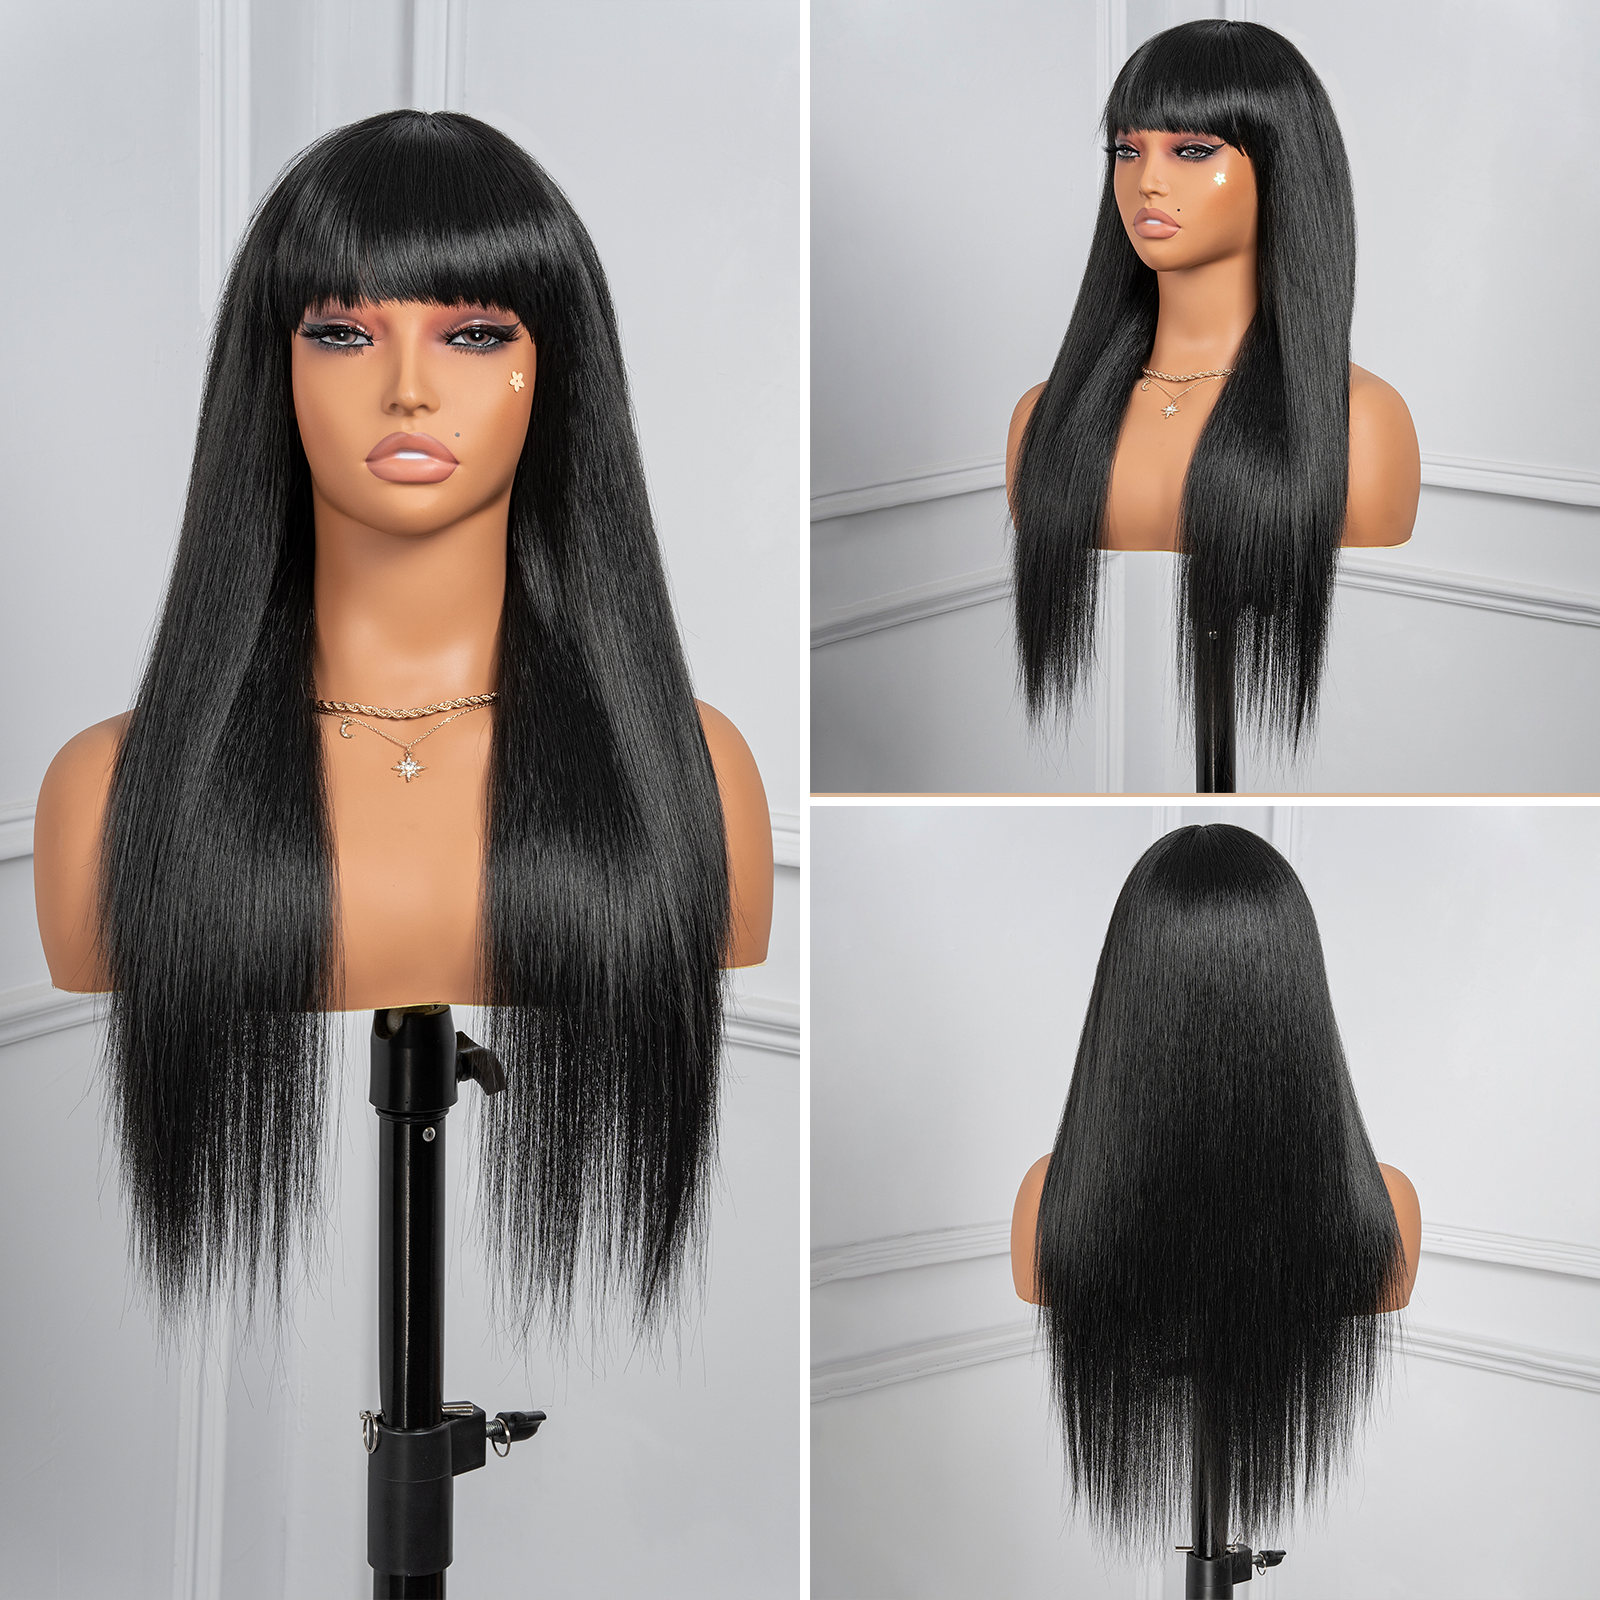 Toyotress Airy Long Straight Black Wig with Bangs | 24-26